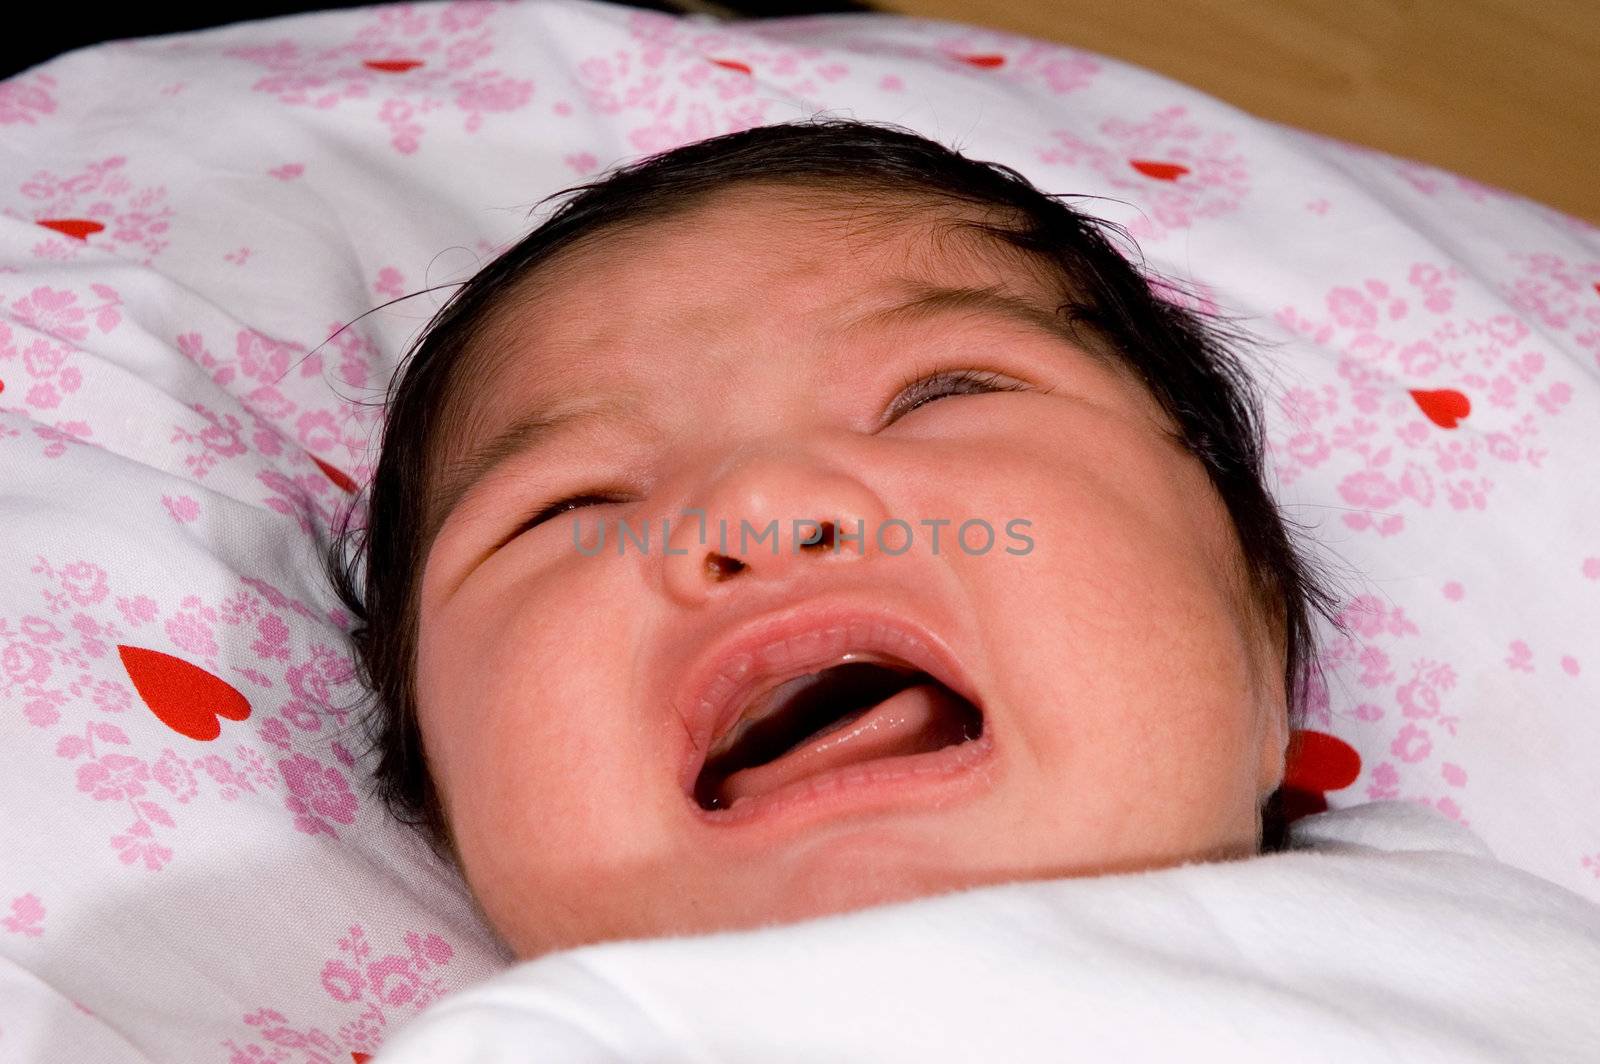 Newborn baby with eyes closed, crying